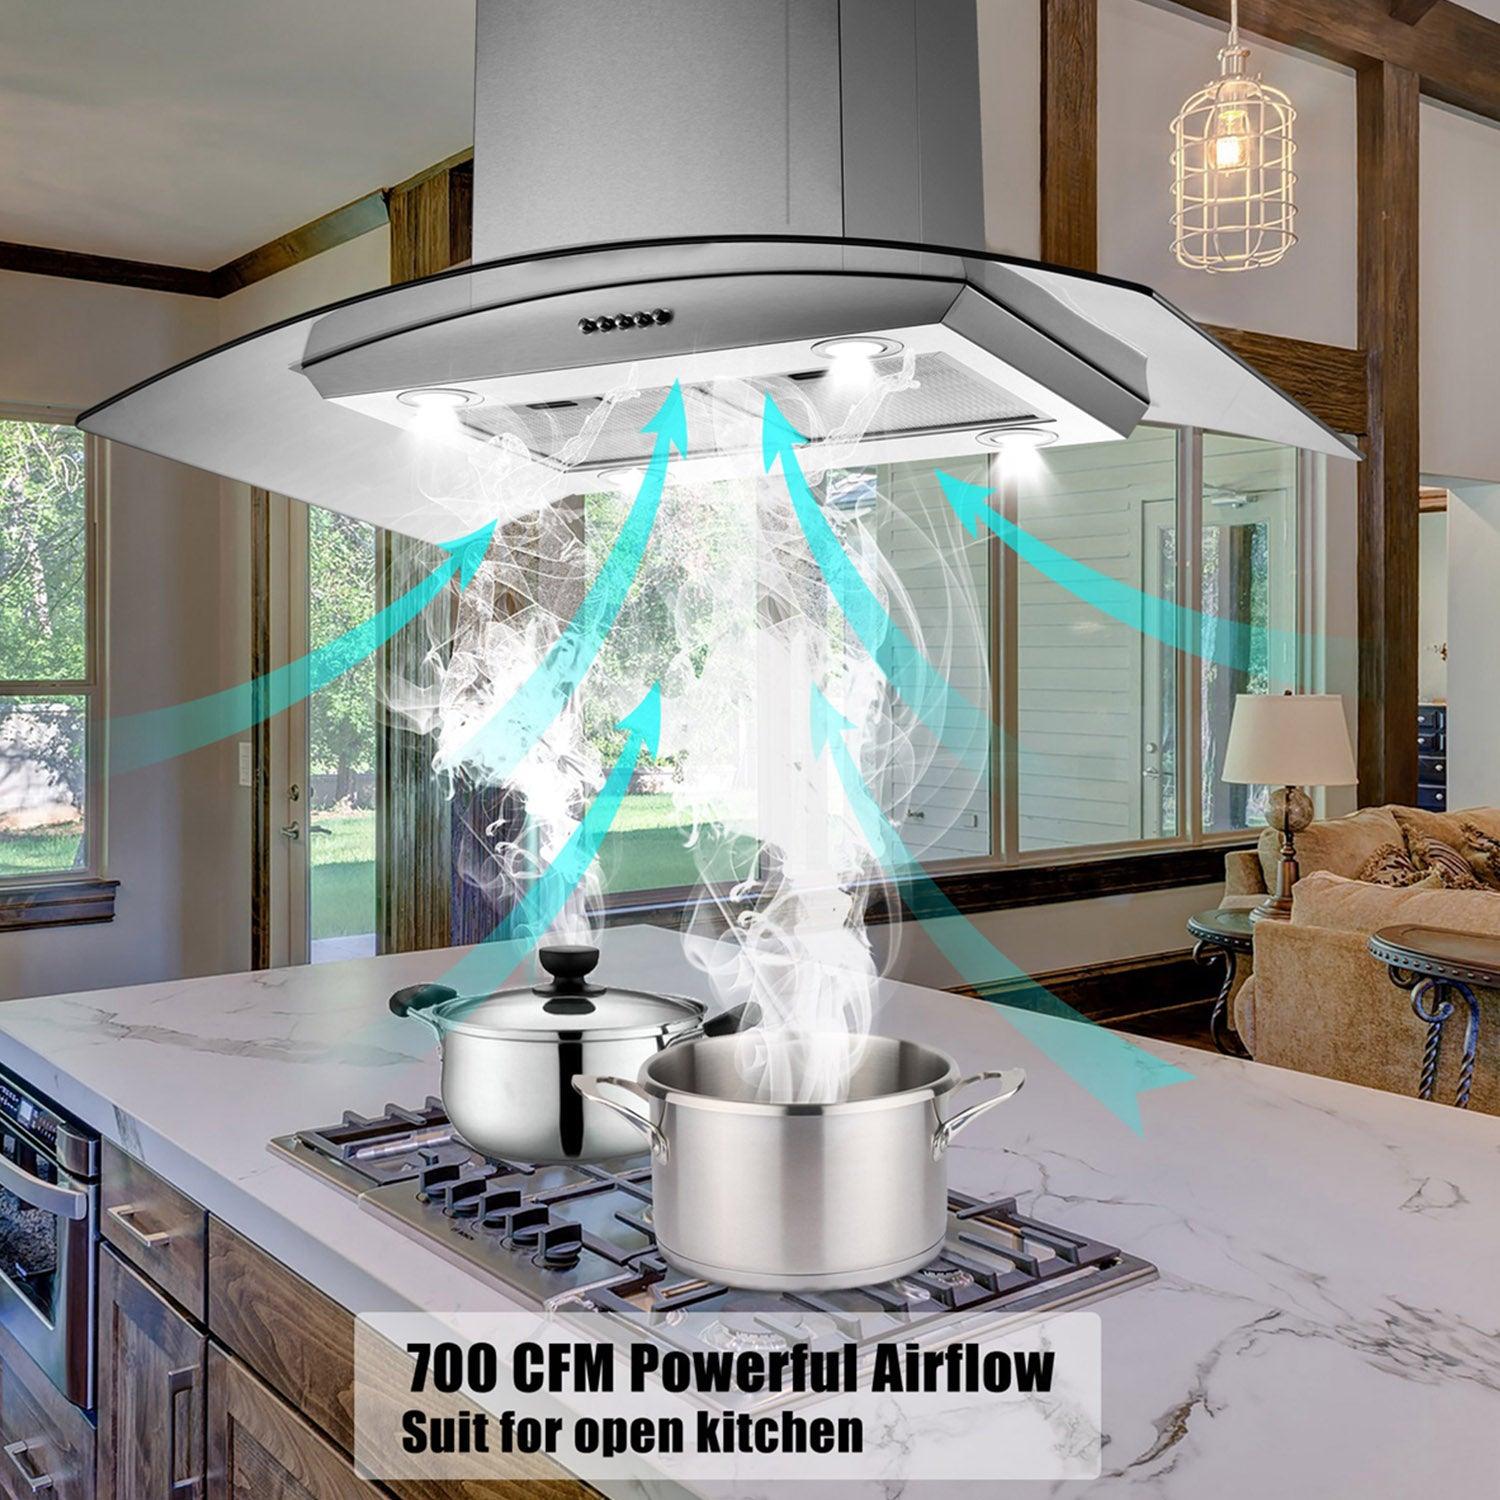 Tieasy Island Range Hood 36 inch 700 CFM Ceiling Mount Kitchen Stove Hood  Ducted with Tempered Glass 4 LED Lights Touch Control 3 Speed Fan Permanent